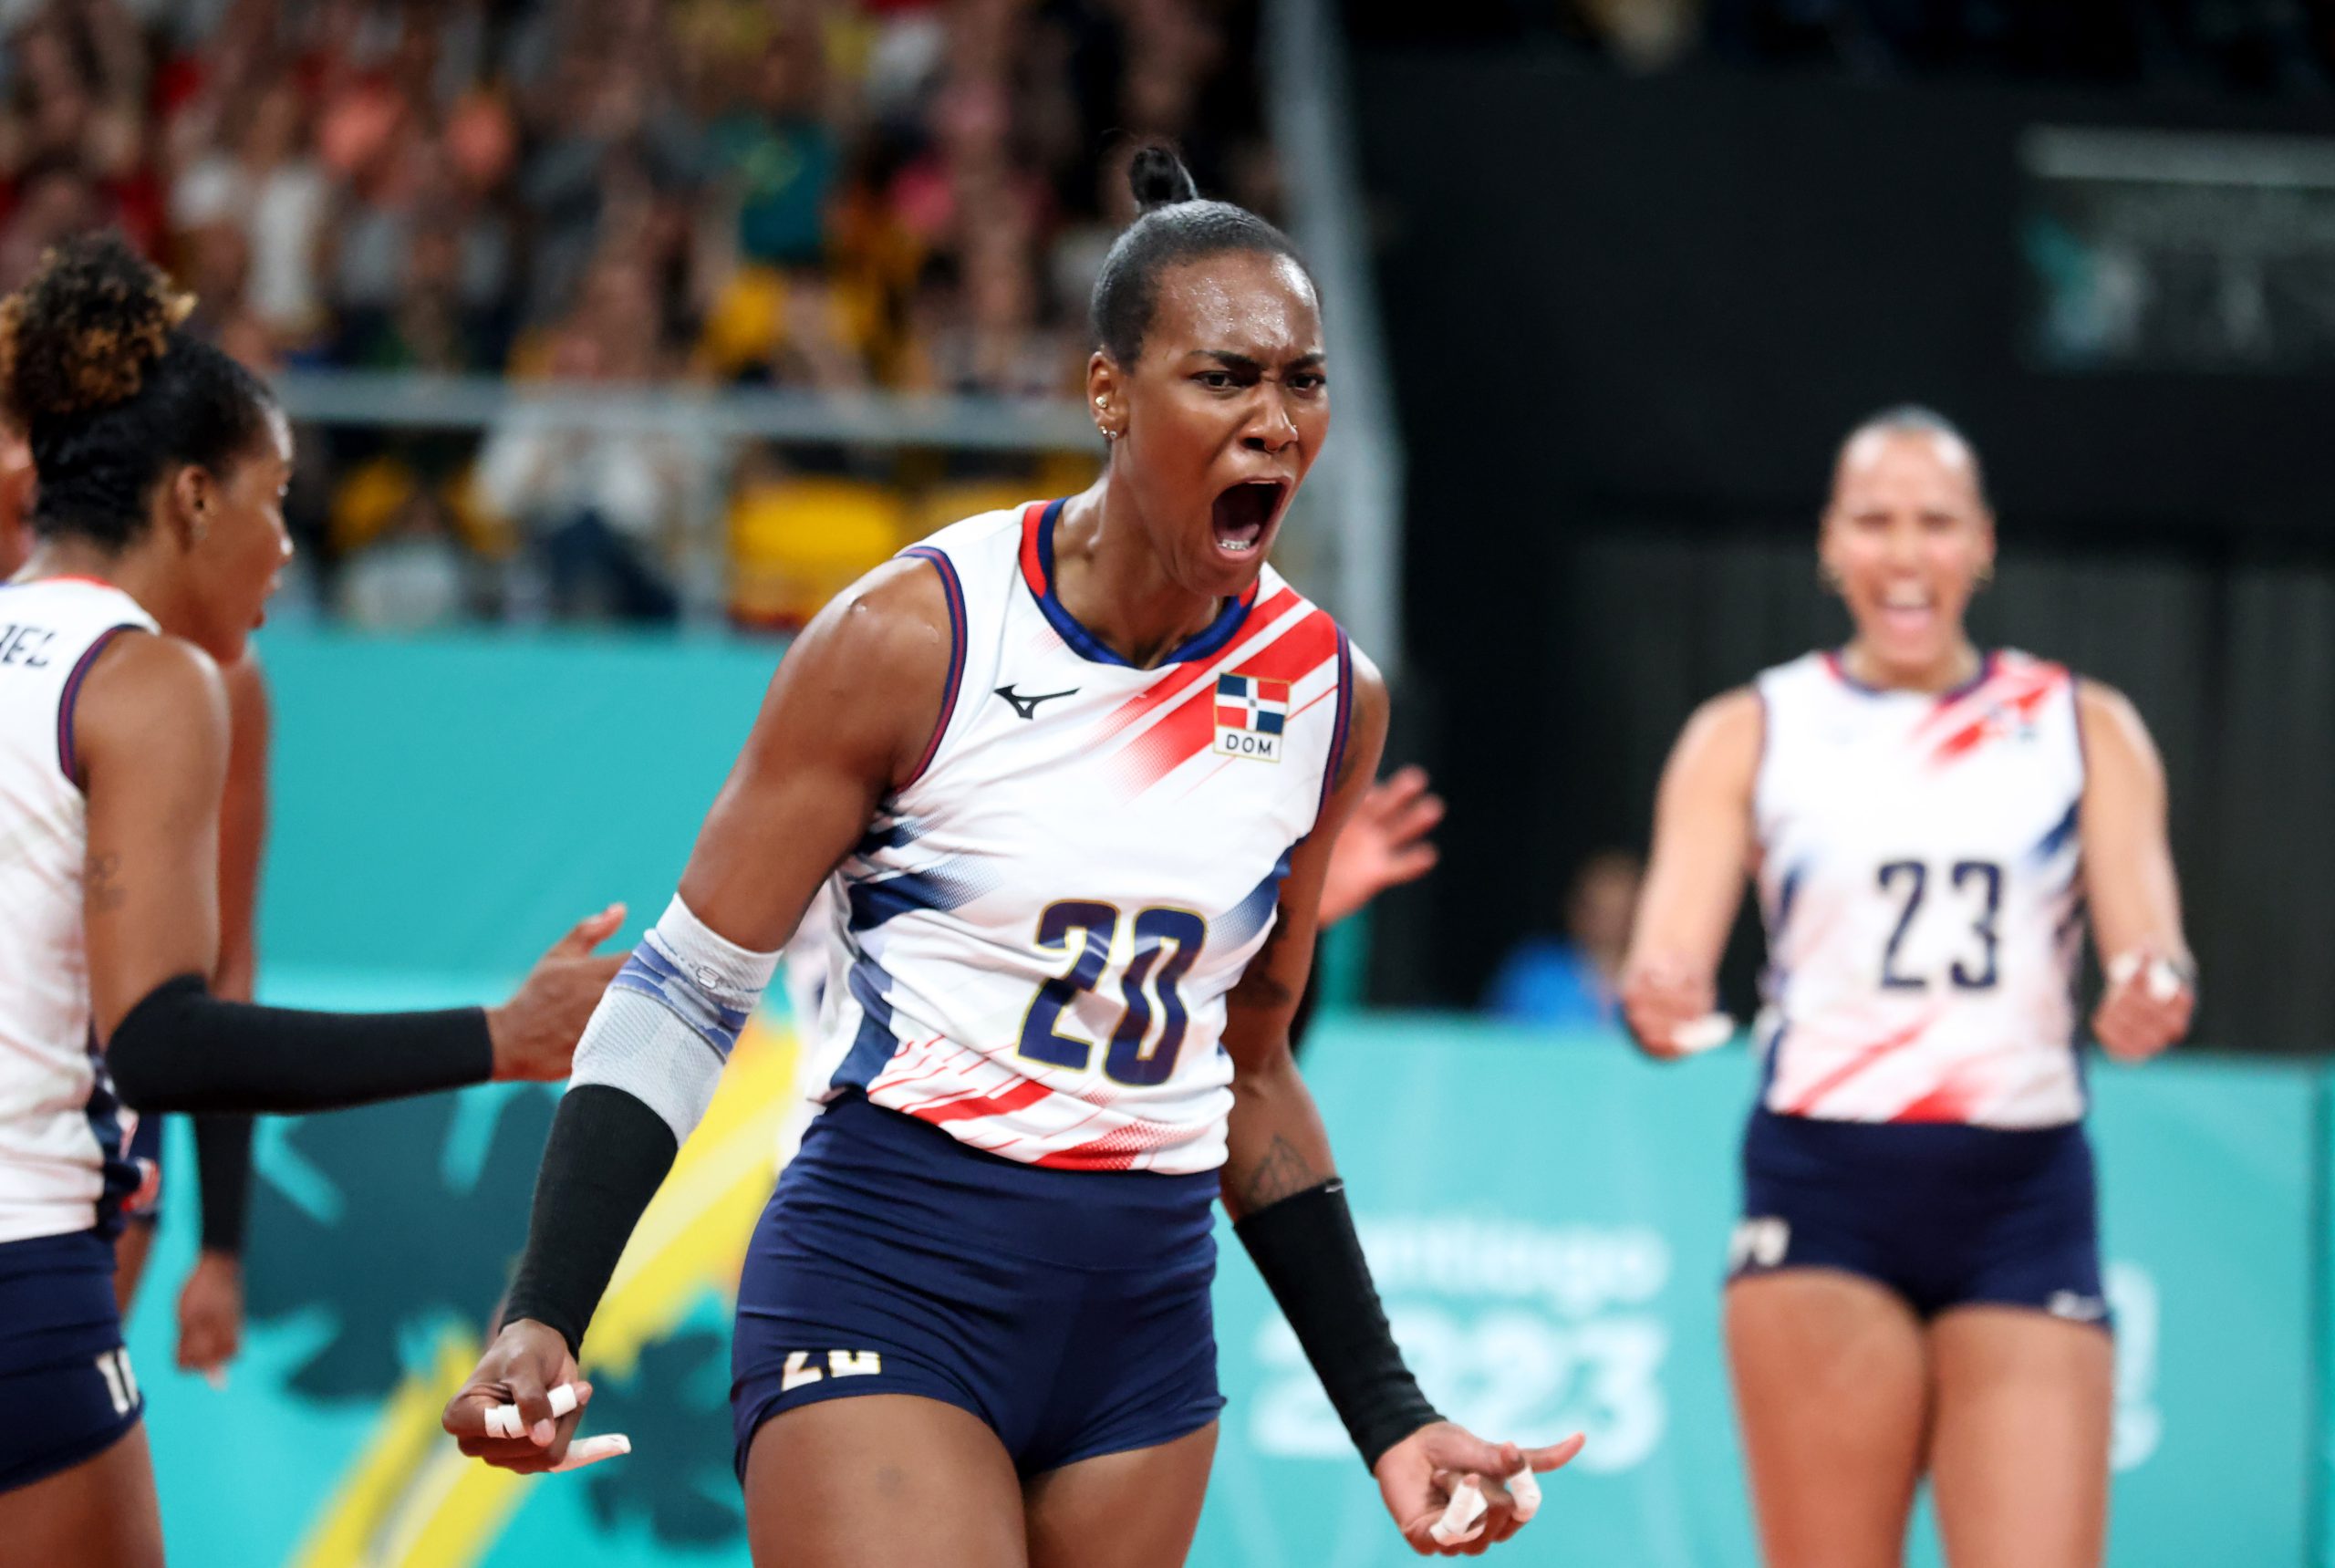 Reigning champions Dominican Republic heads into Santiago 2023 title match undefeated